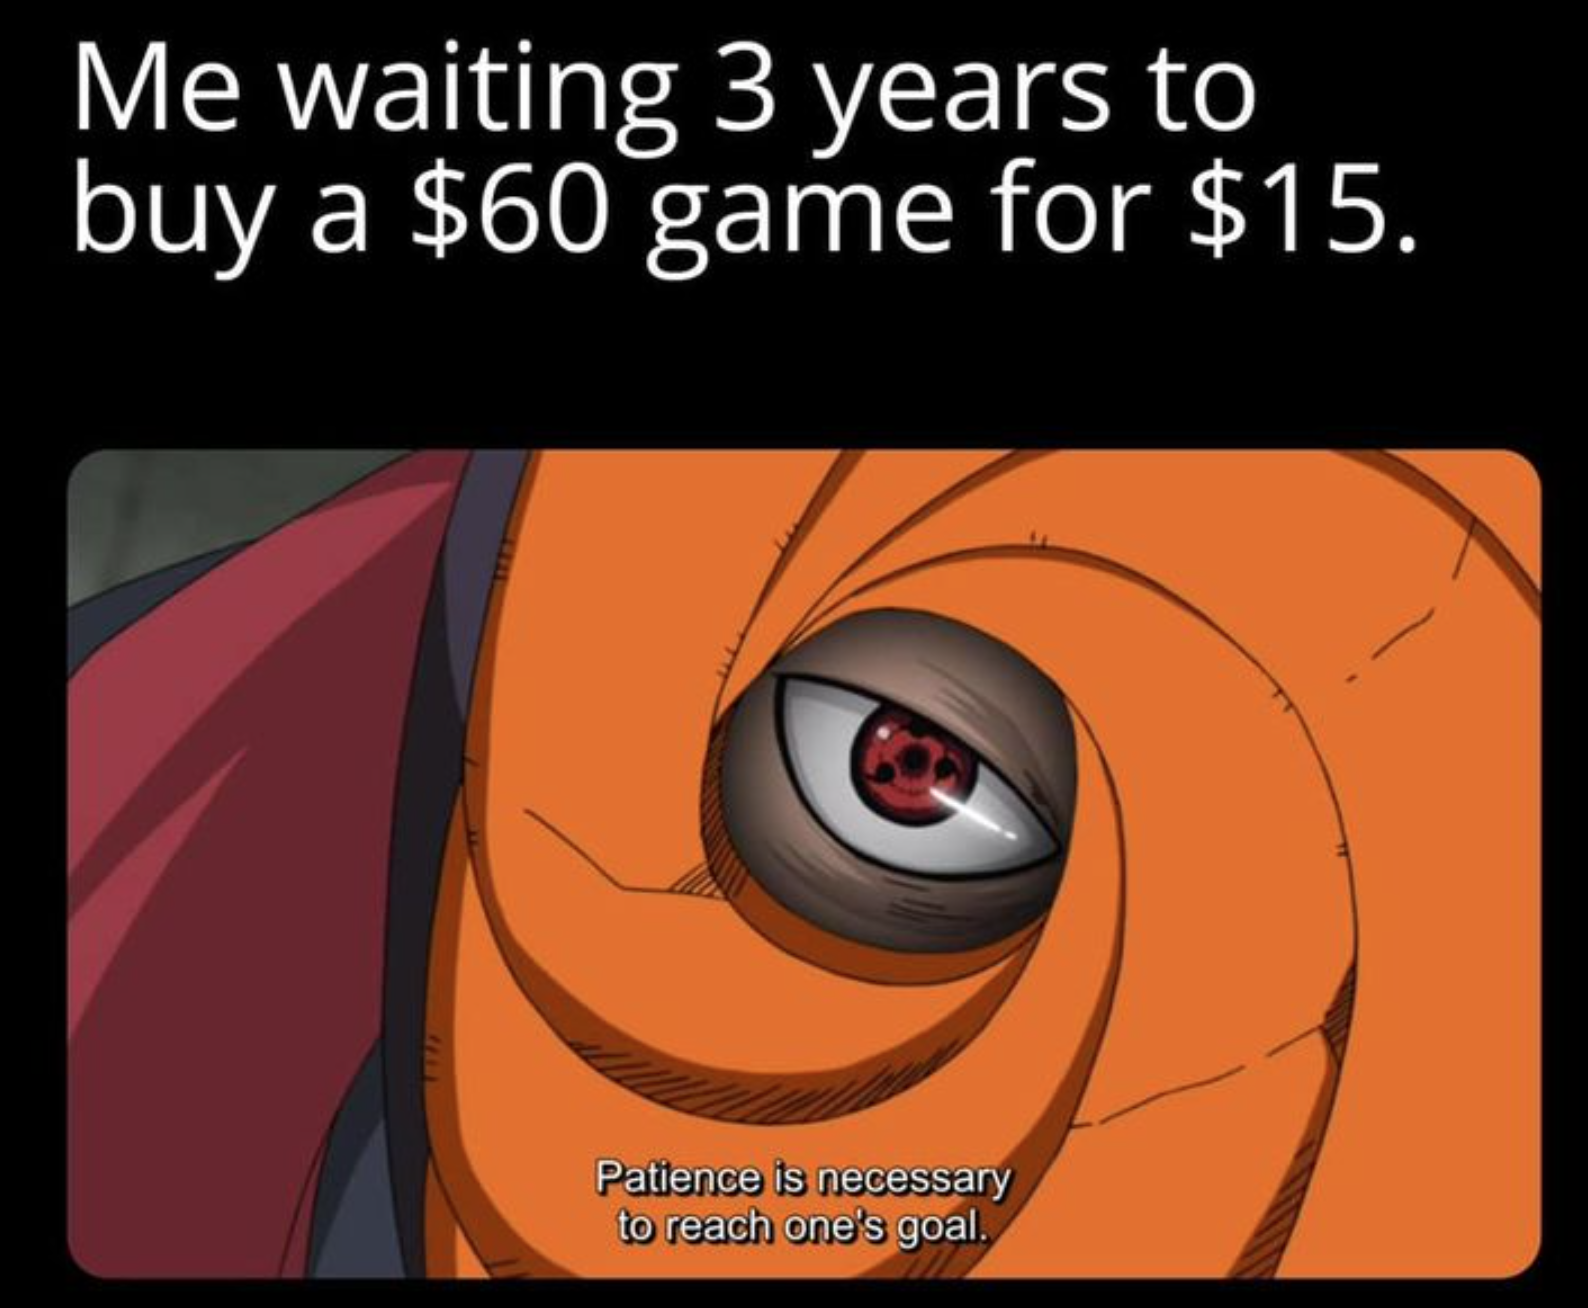 funny gaming memes - cartoon - Me waiting 3 years to buy a $60 game for $15. Patience is necessary to reach one's goal.